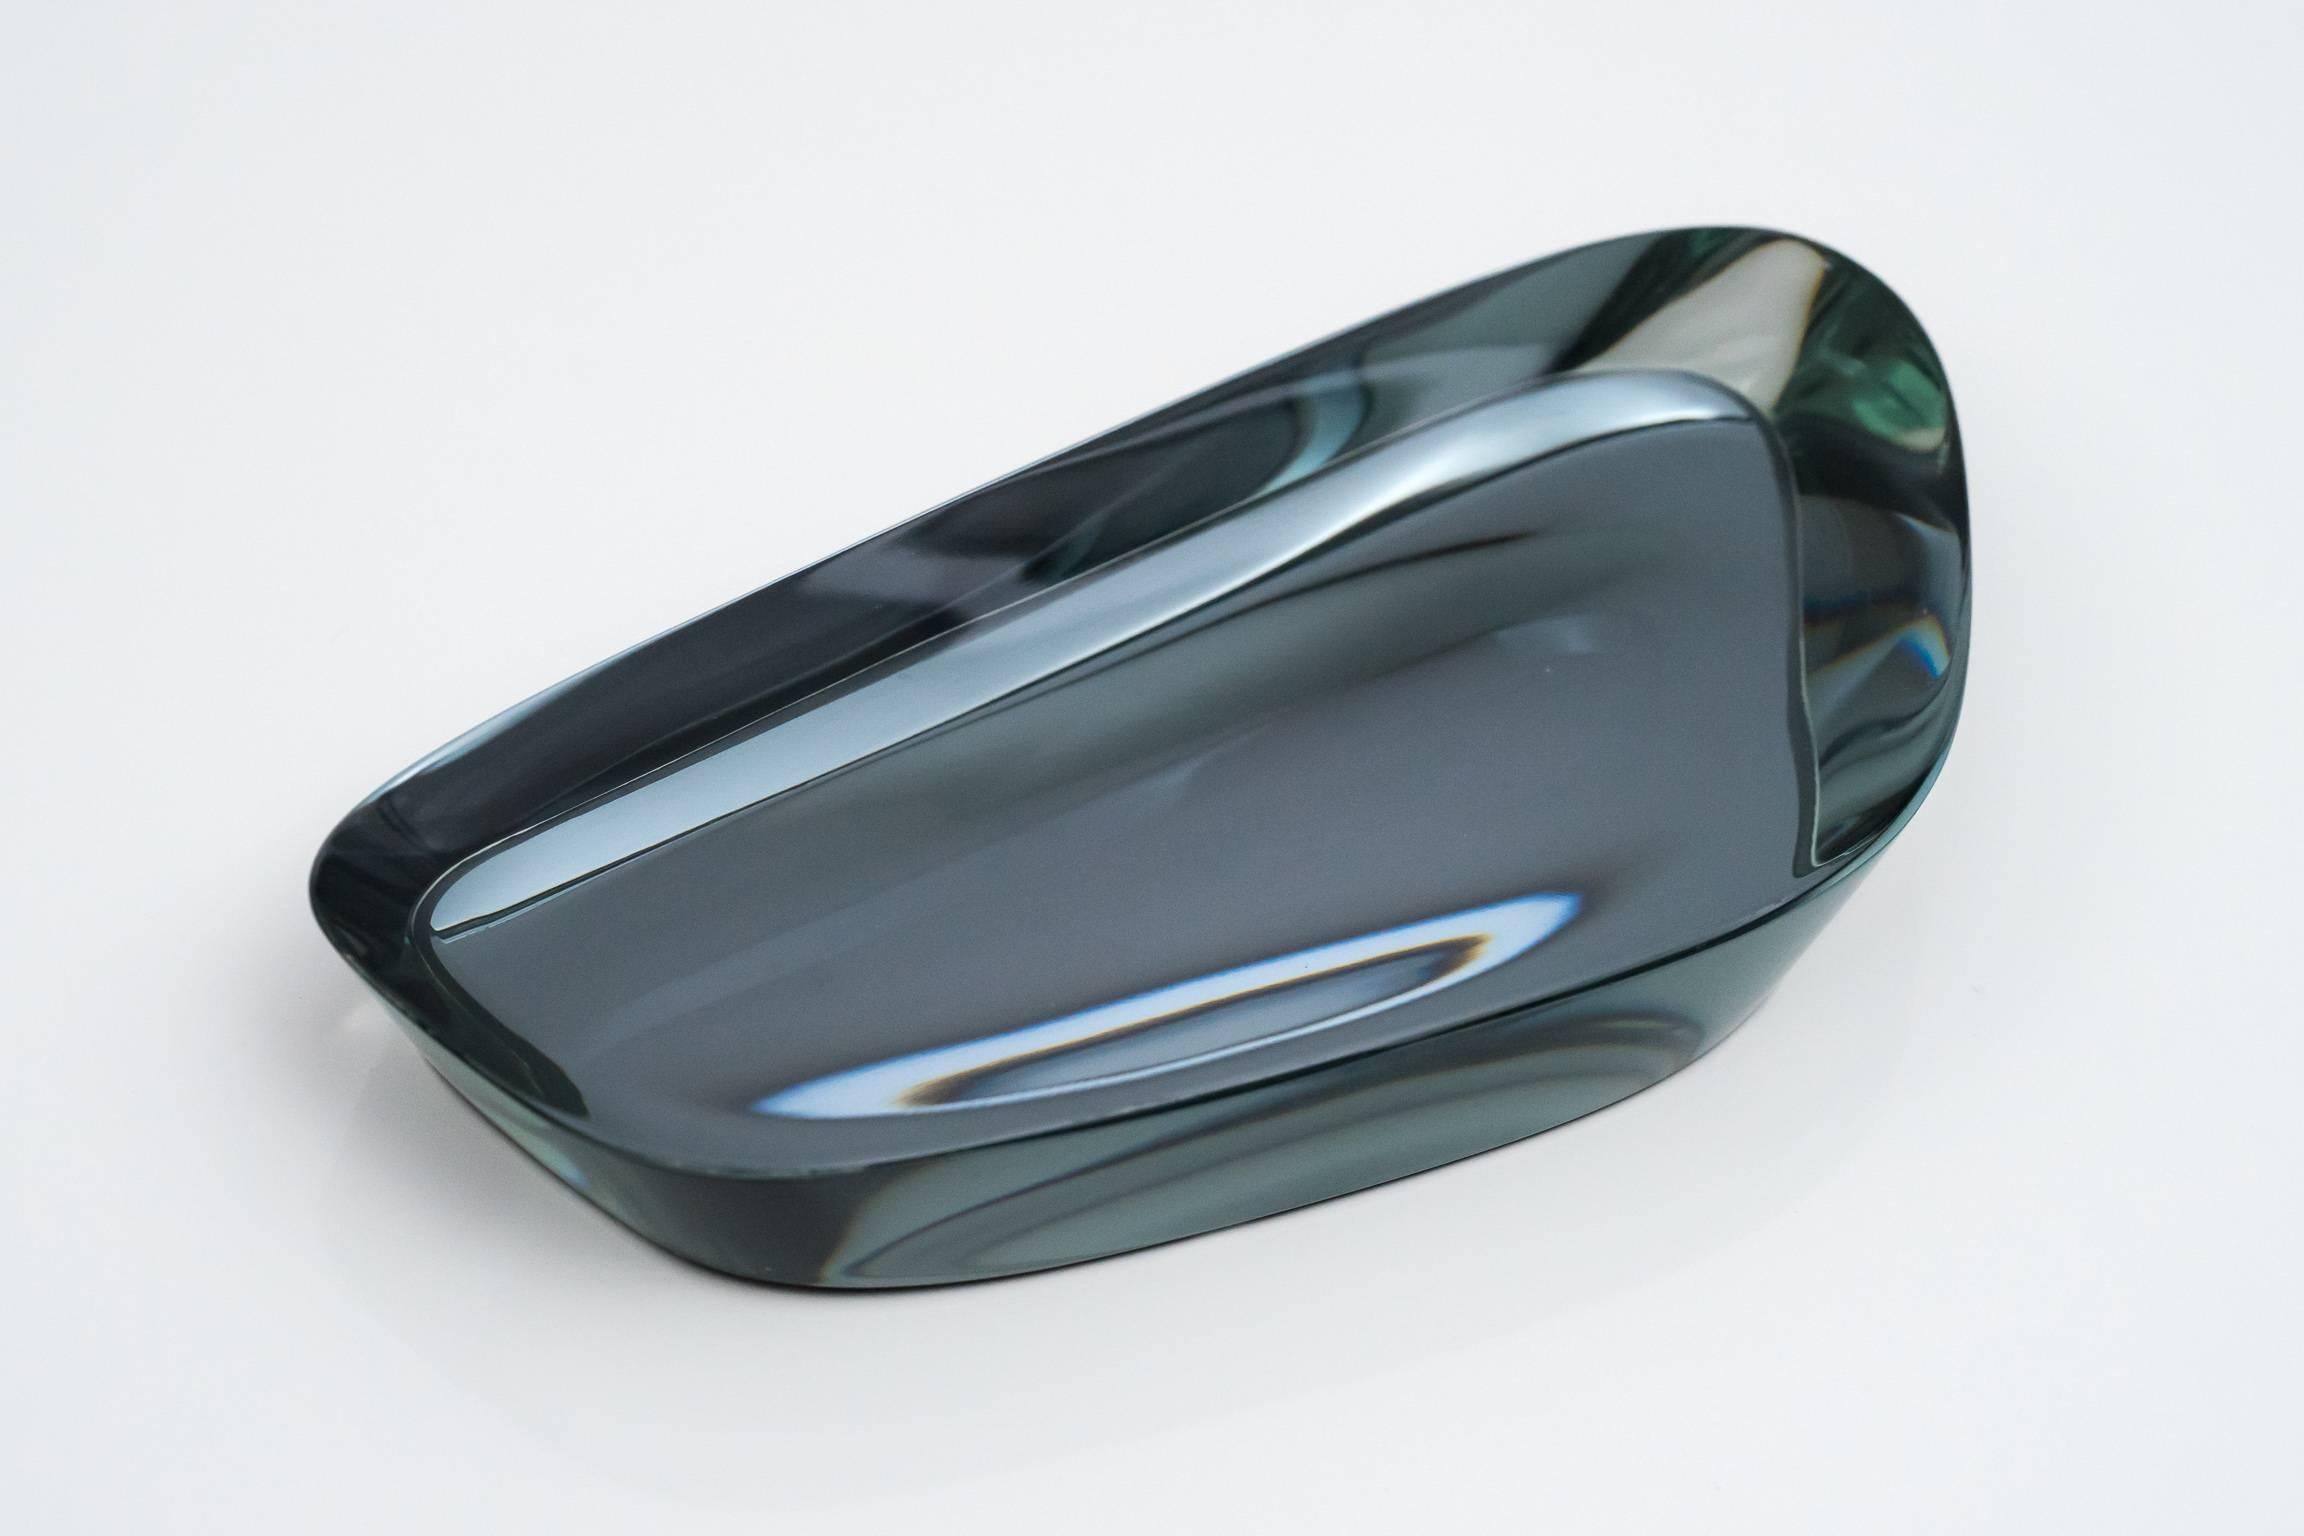 Fontana Arte Cut and Polished Mirrored Glass Abstract Dish, 1950s (Geschliffenes Glas)